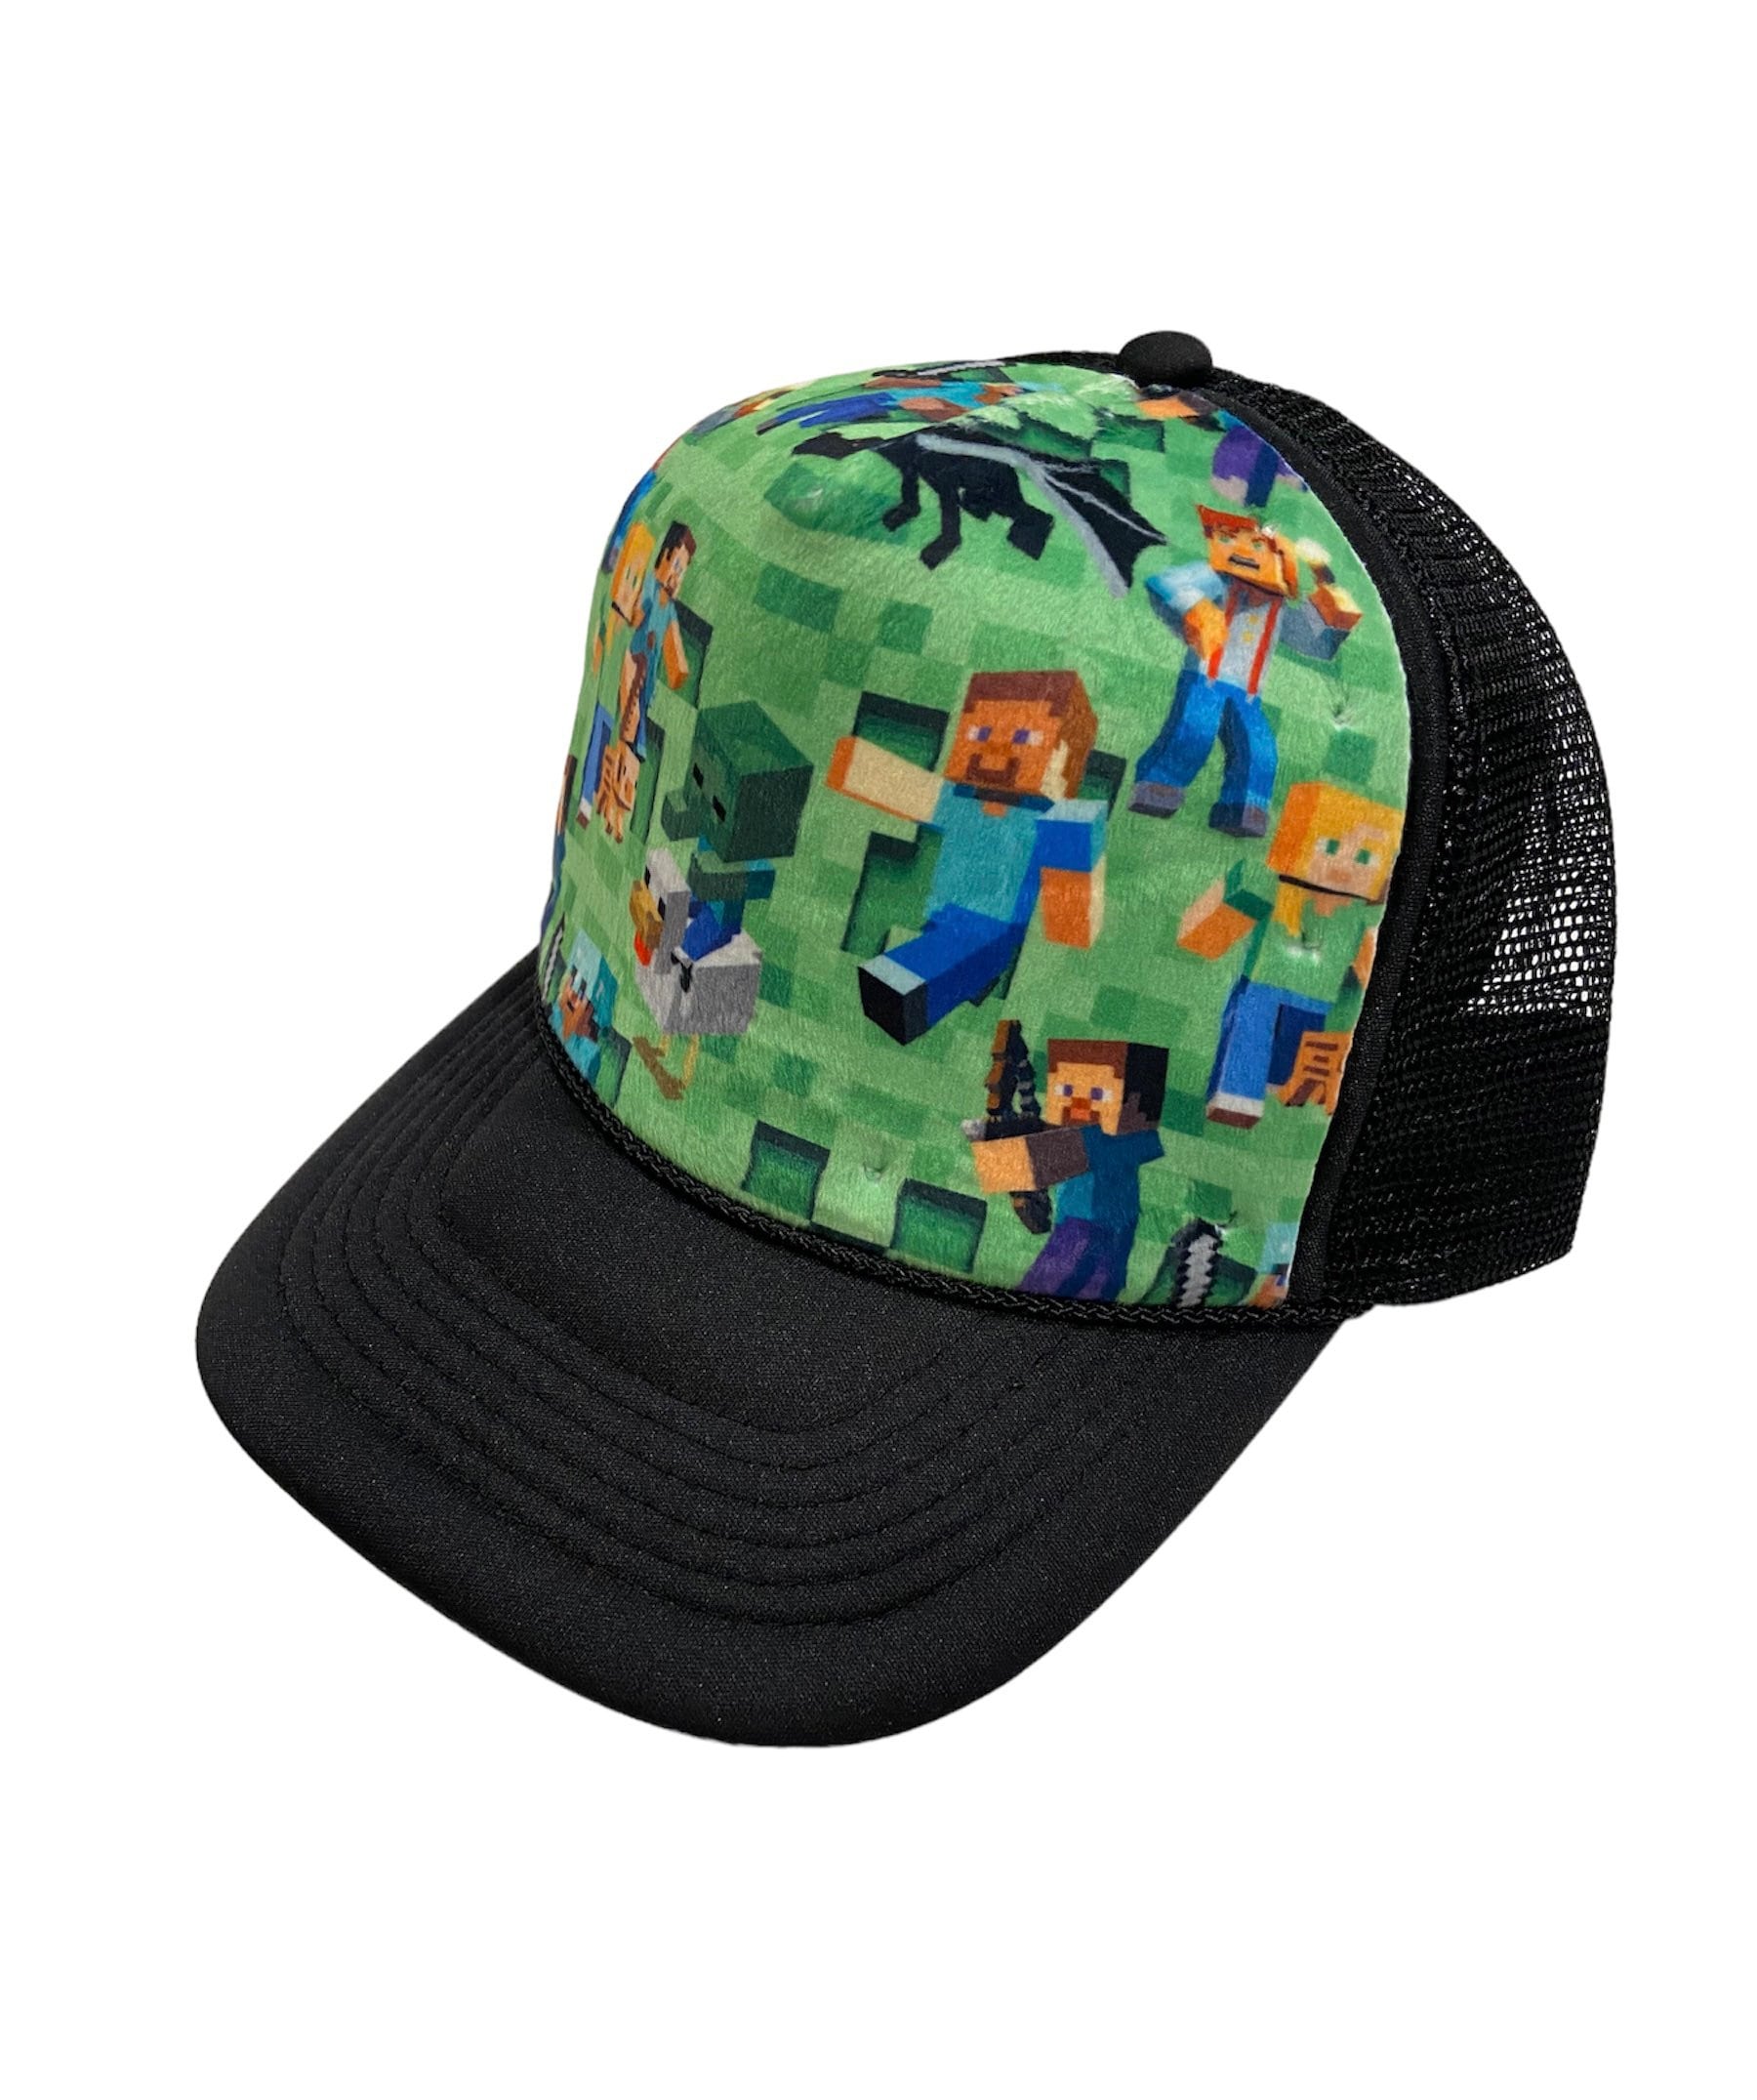 Playstation Trucker Hat for All Ages